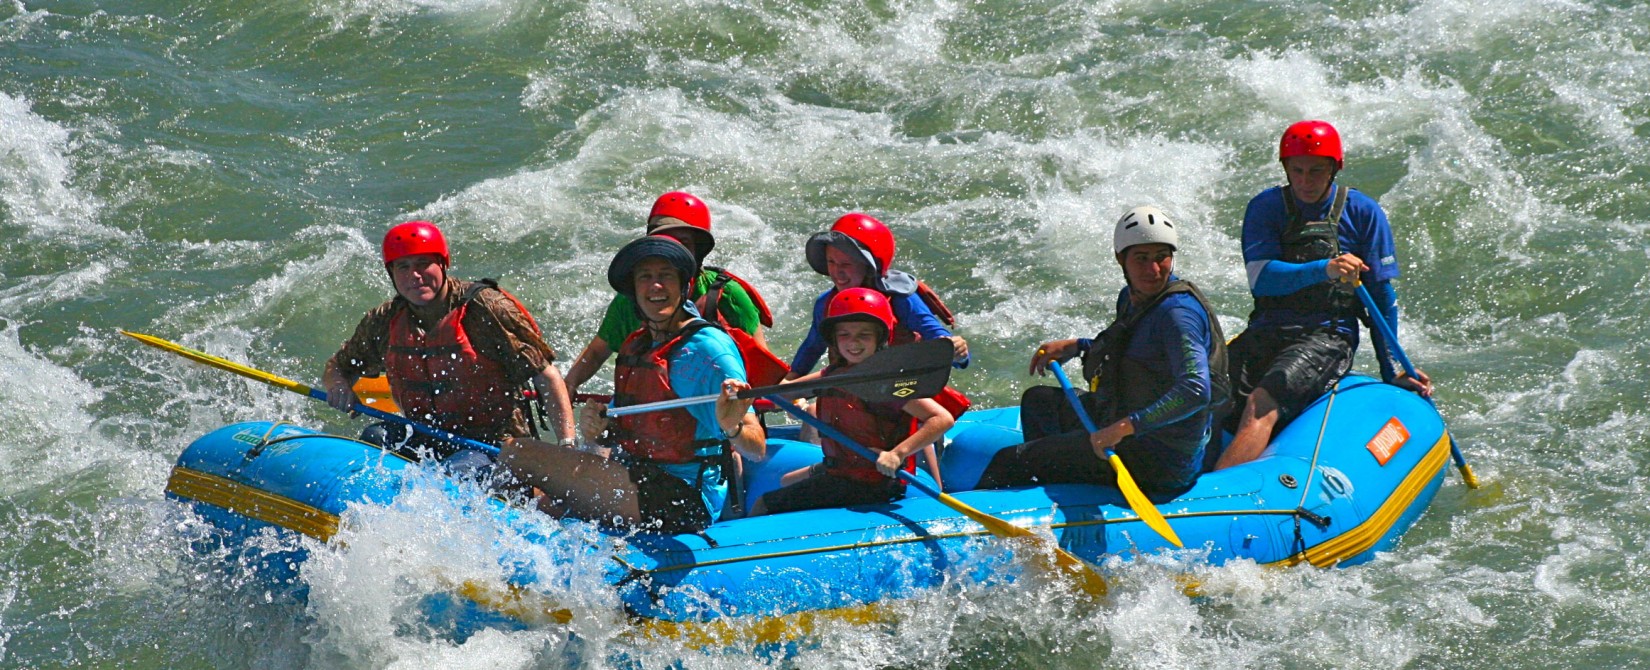 Trishuli River is an excellent, famous river rafting in Nepal  